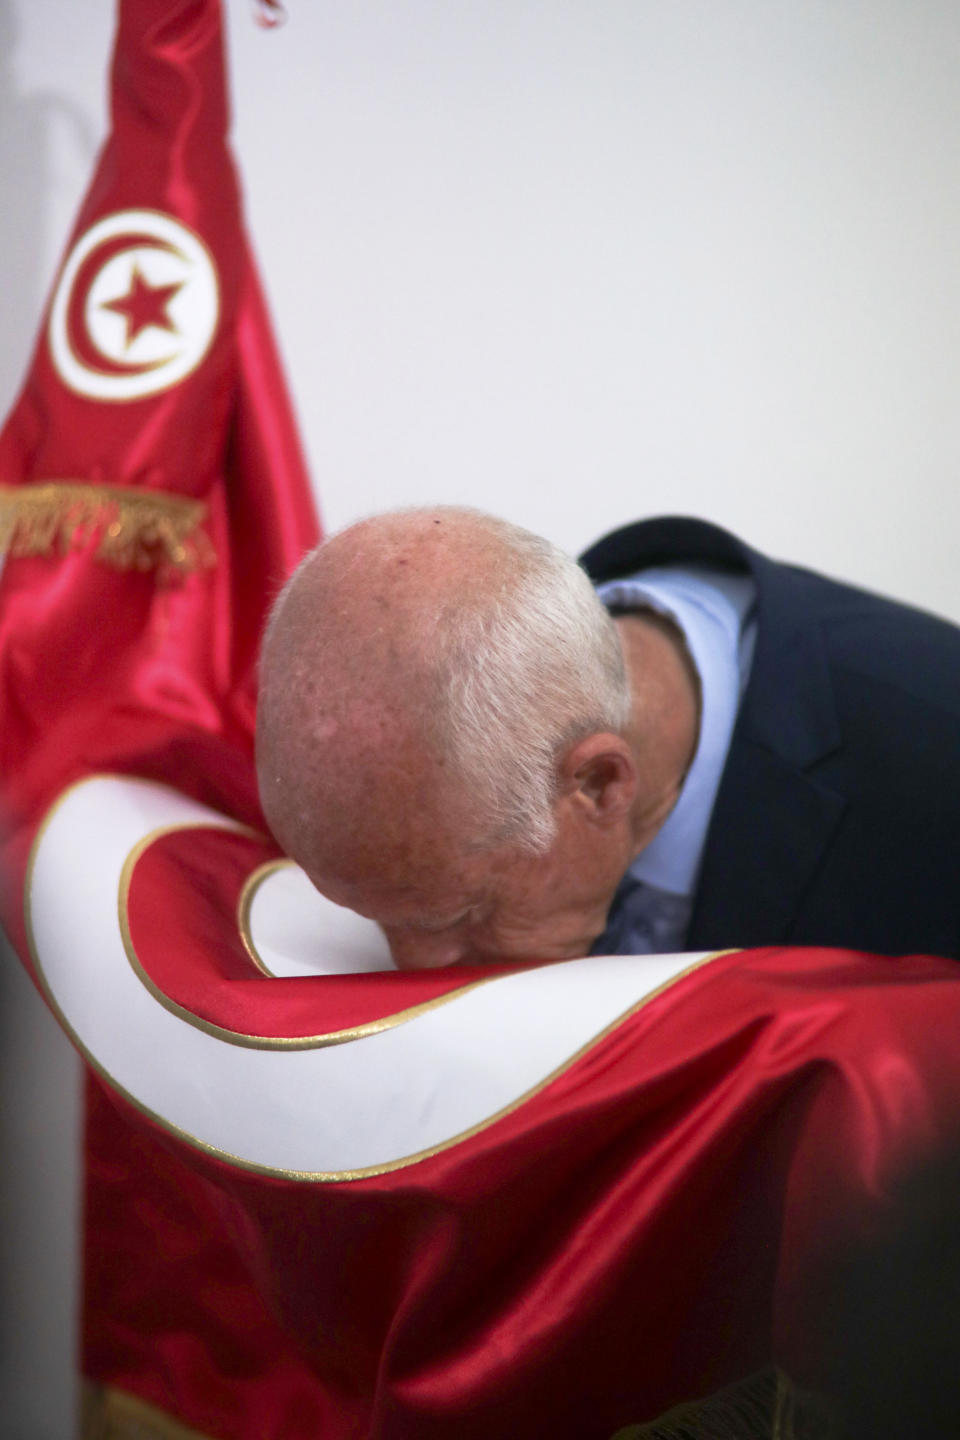 Tunisian former conservative constitutional law professor Kais Saied kisses the national flag in his office in Tunis, Tunisia, Tuesday, Sept. 17, 2019. With more than half the votes in Tunisia's presidential race counted, Kais Saied was in the lead. Media magnate Nabil Karoui, a more modernizing candidate, was in second place with 15.5%. (AP Photo/Mosa'ab Elshamy)